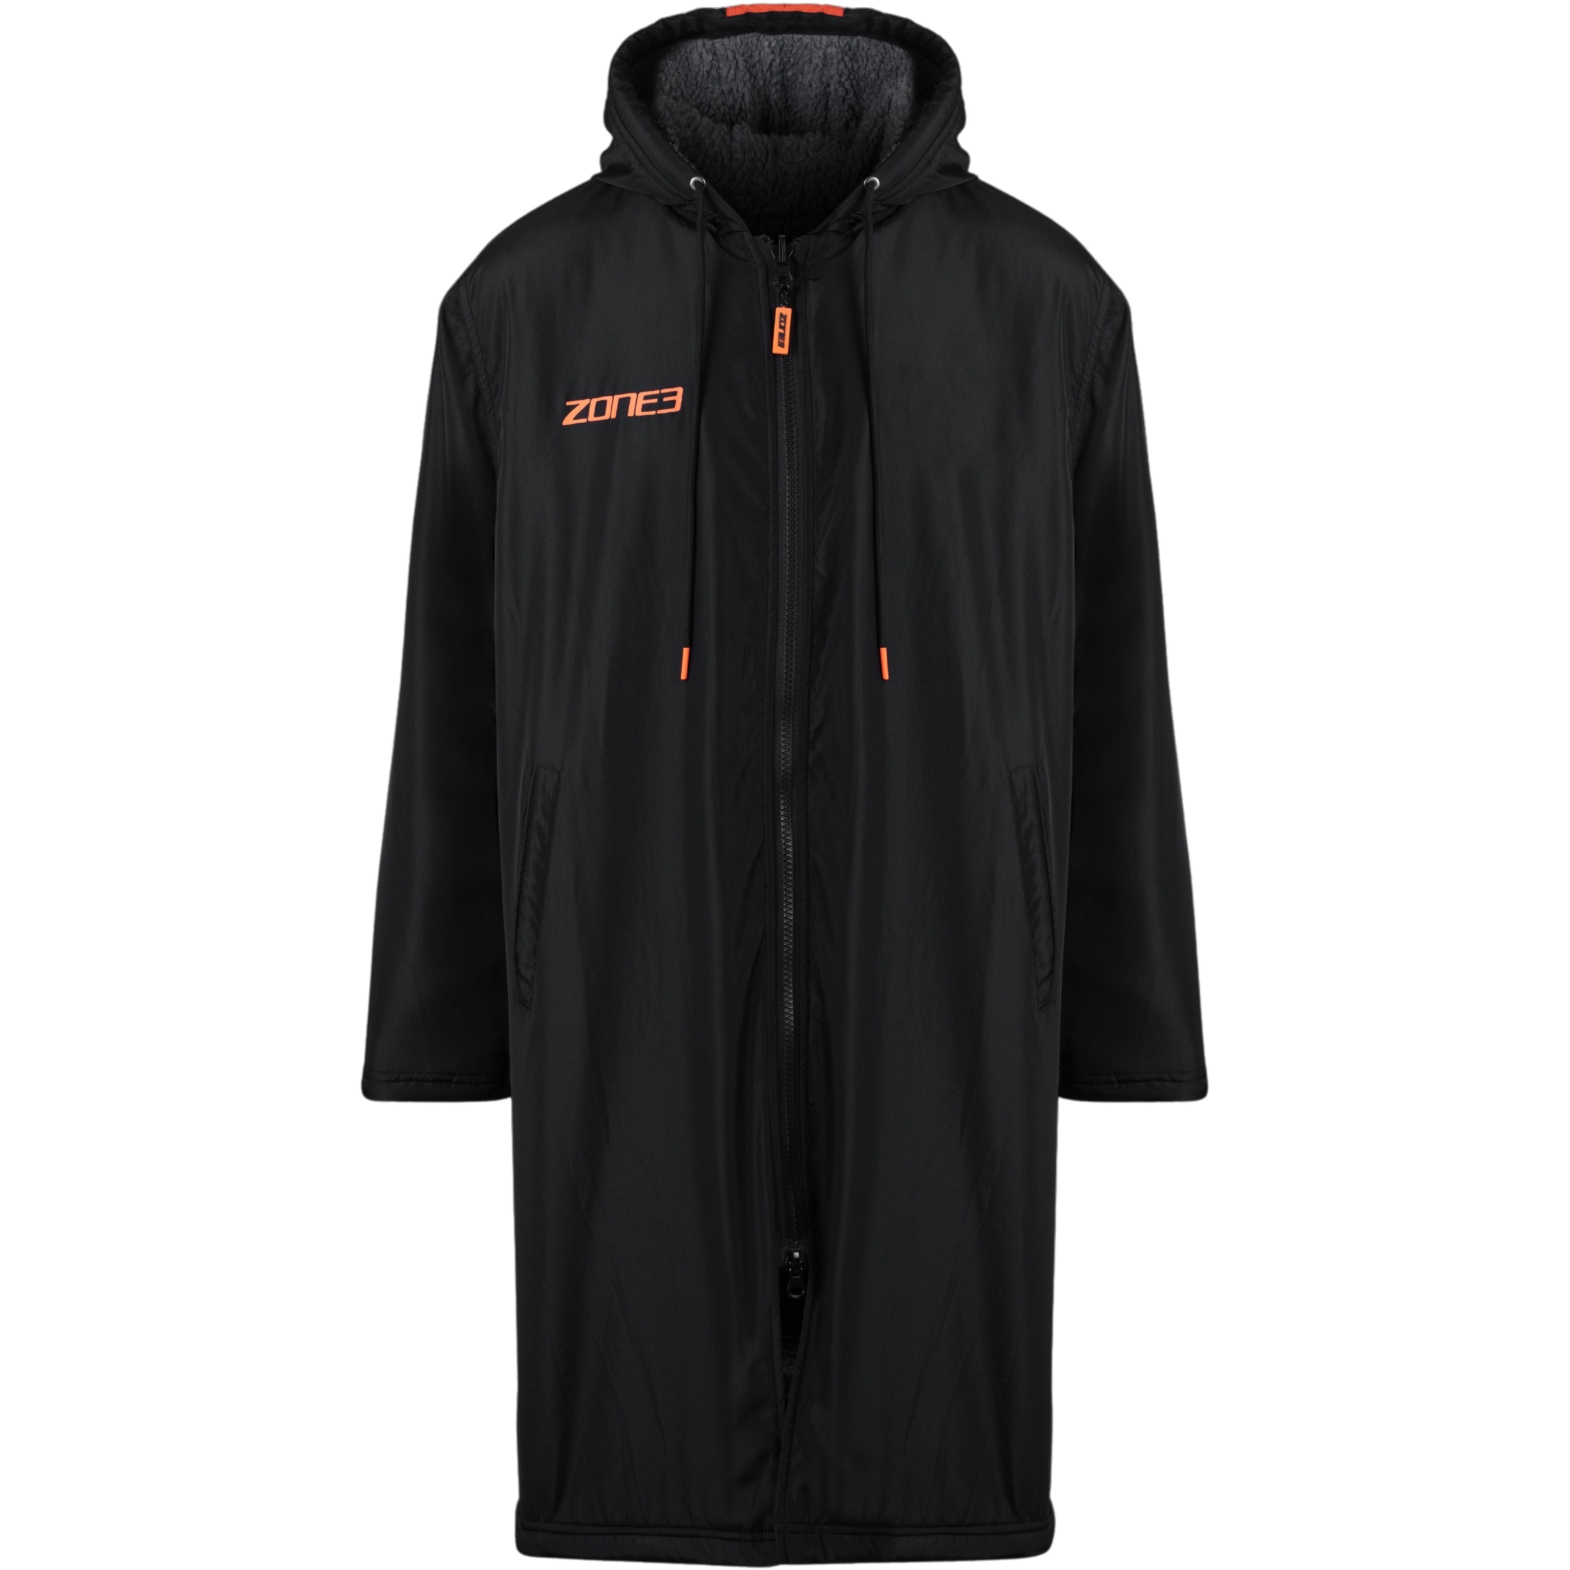 Picture of Zone3 Recycled Parka Robe - black/grey/orange